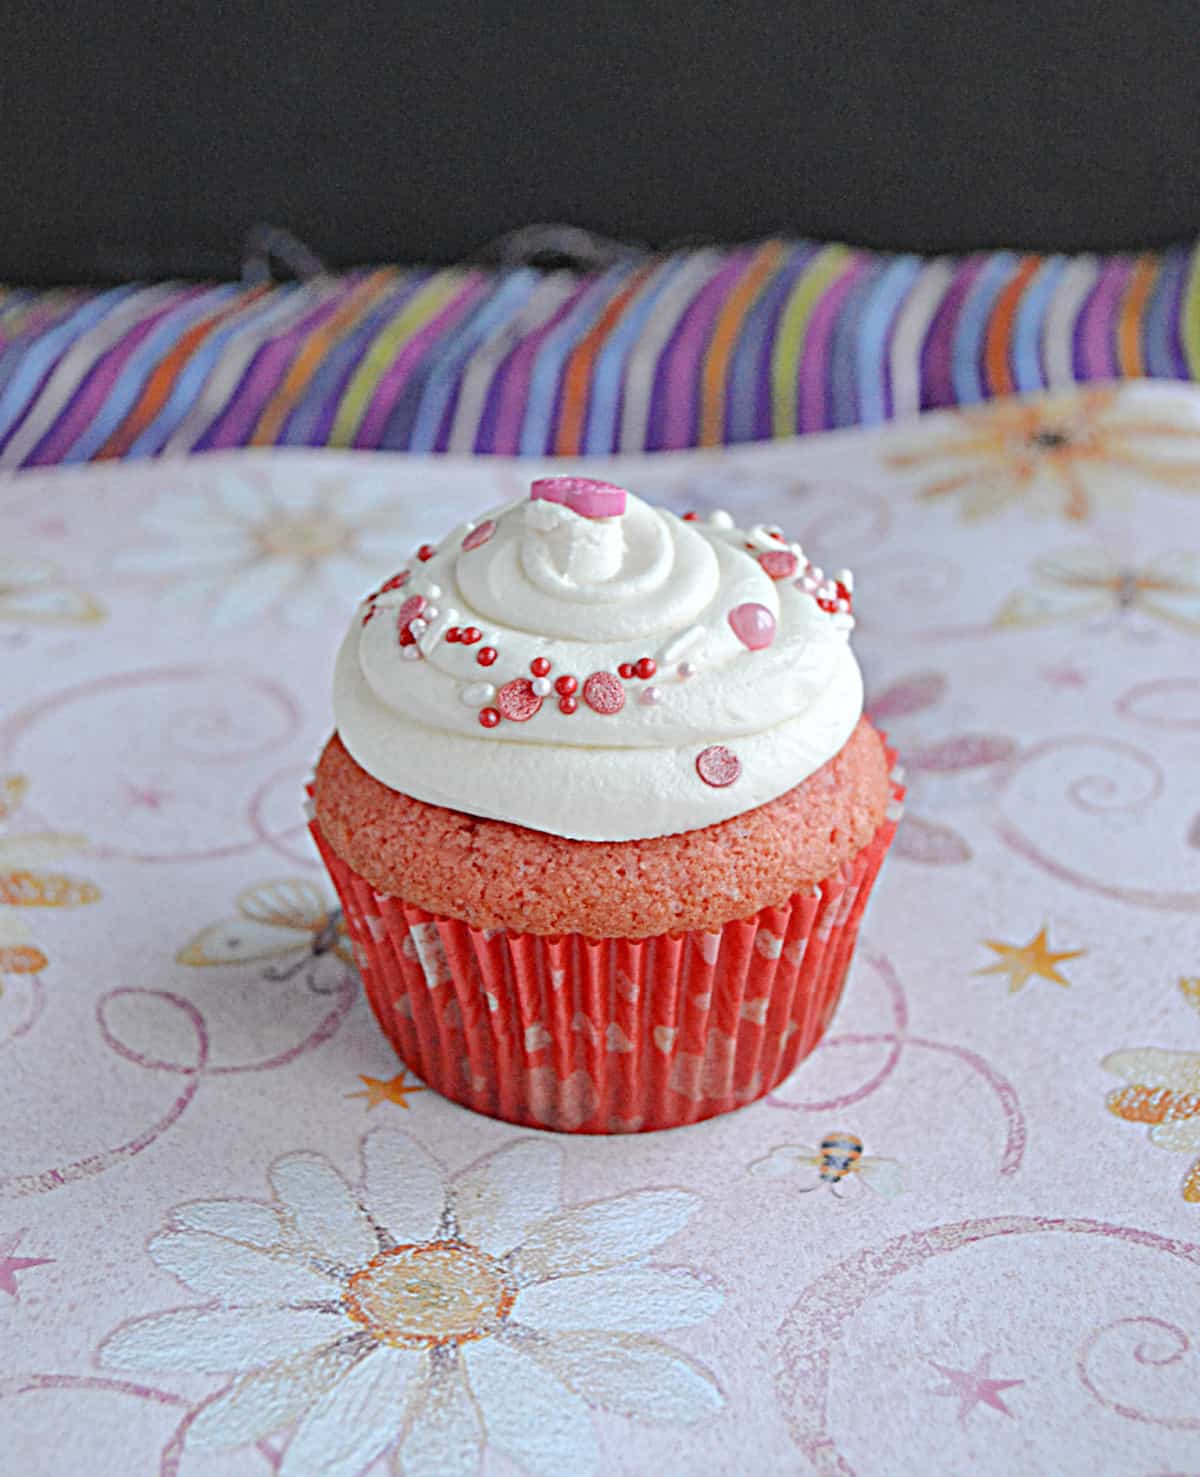 A pink velvet cupcake with white frosting on top.